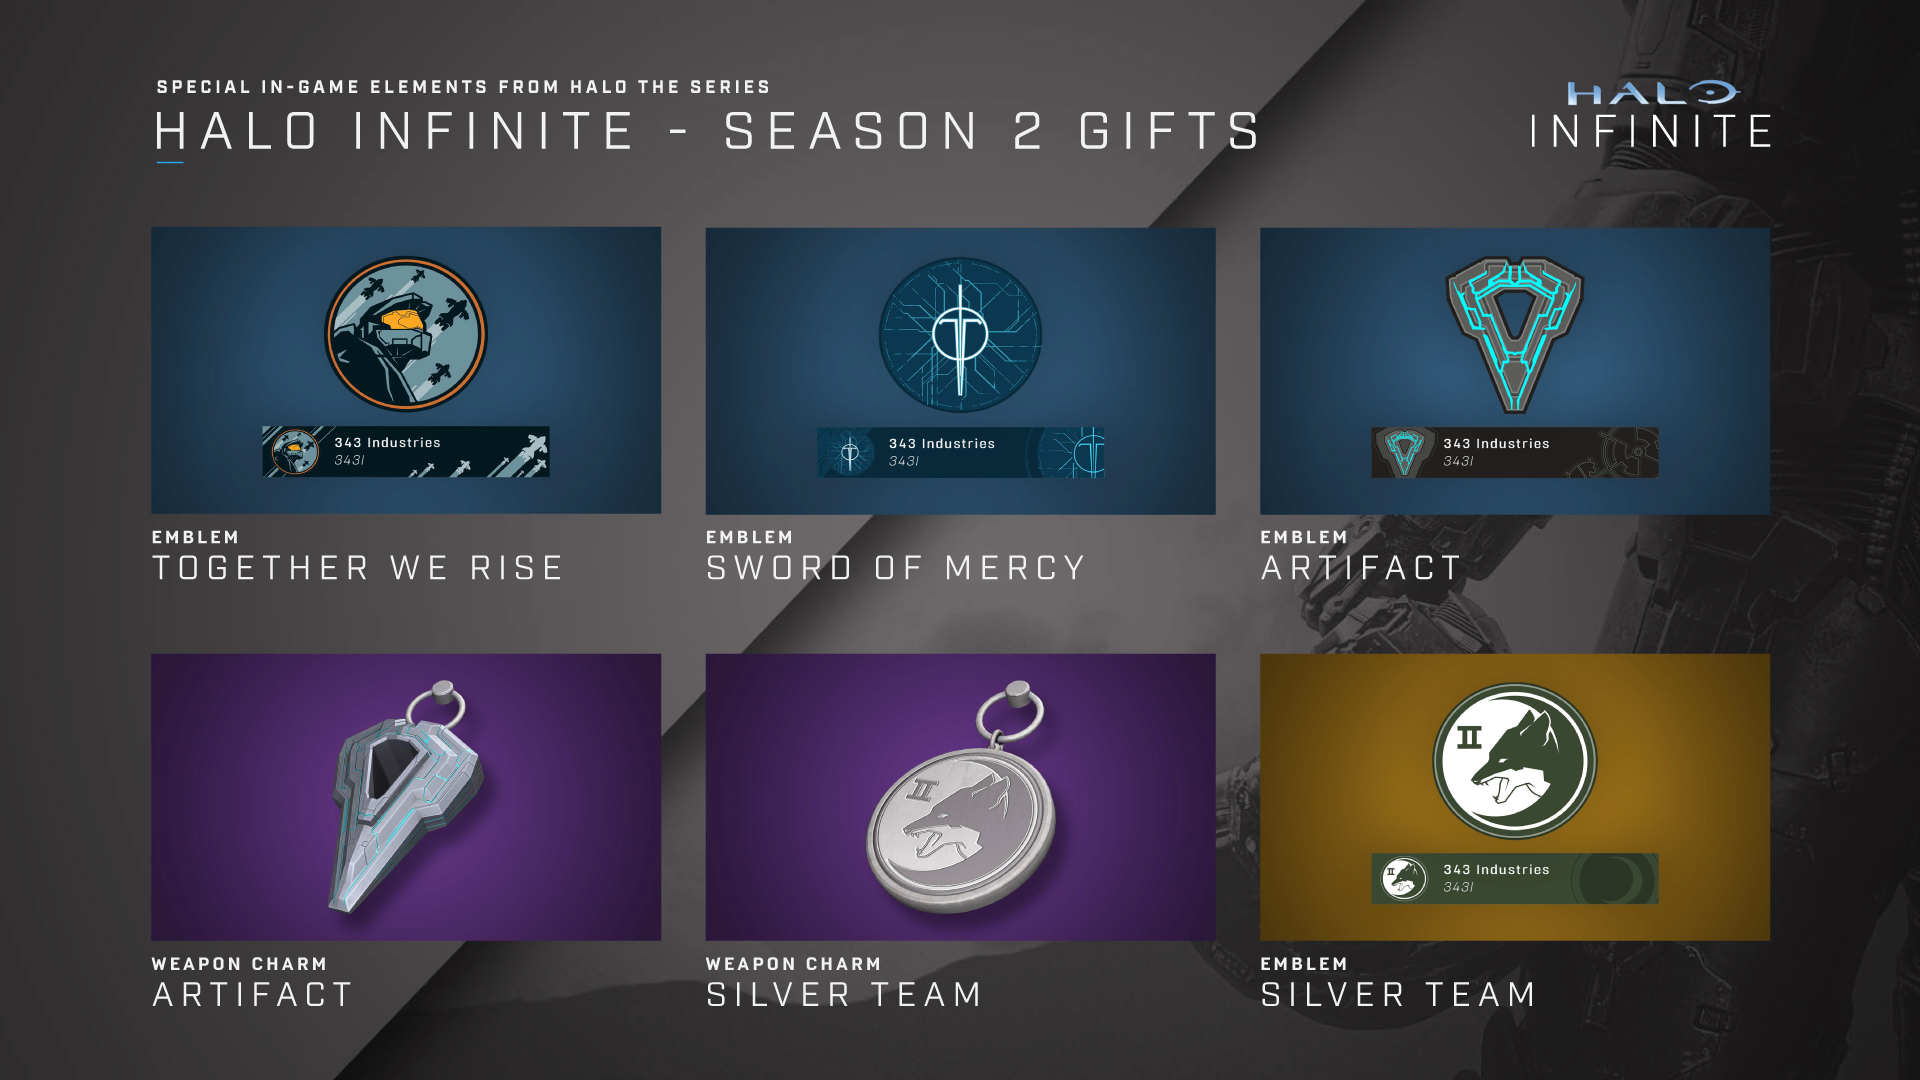 Image of Silver Gifts in Halo Infinite, including: Together We Rise emblem, Sword of Mercy emblem, Artifact emblem, Artifact weapon charm, Silver Team weapon charm, Silver Team emblem